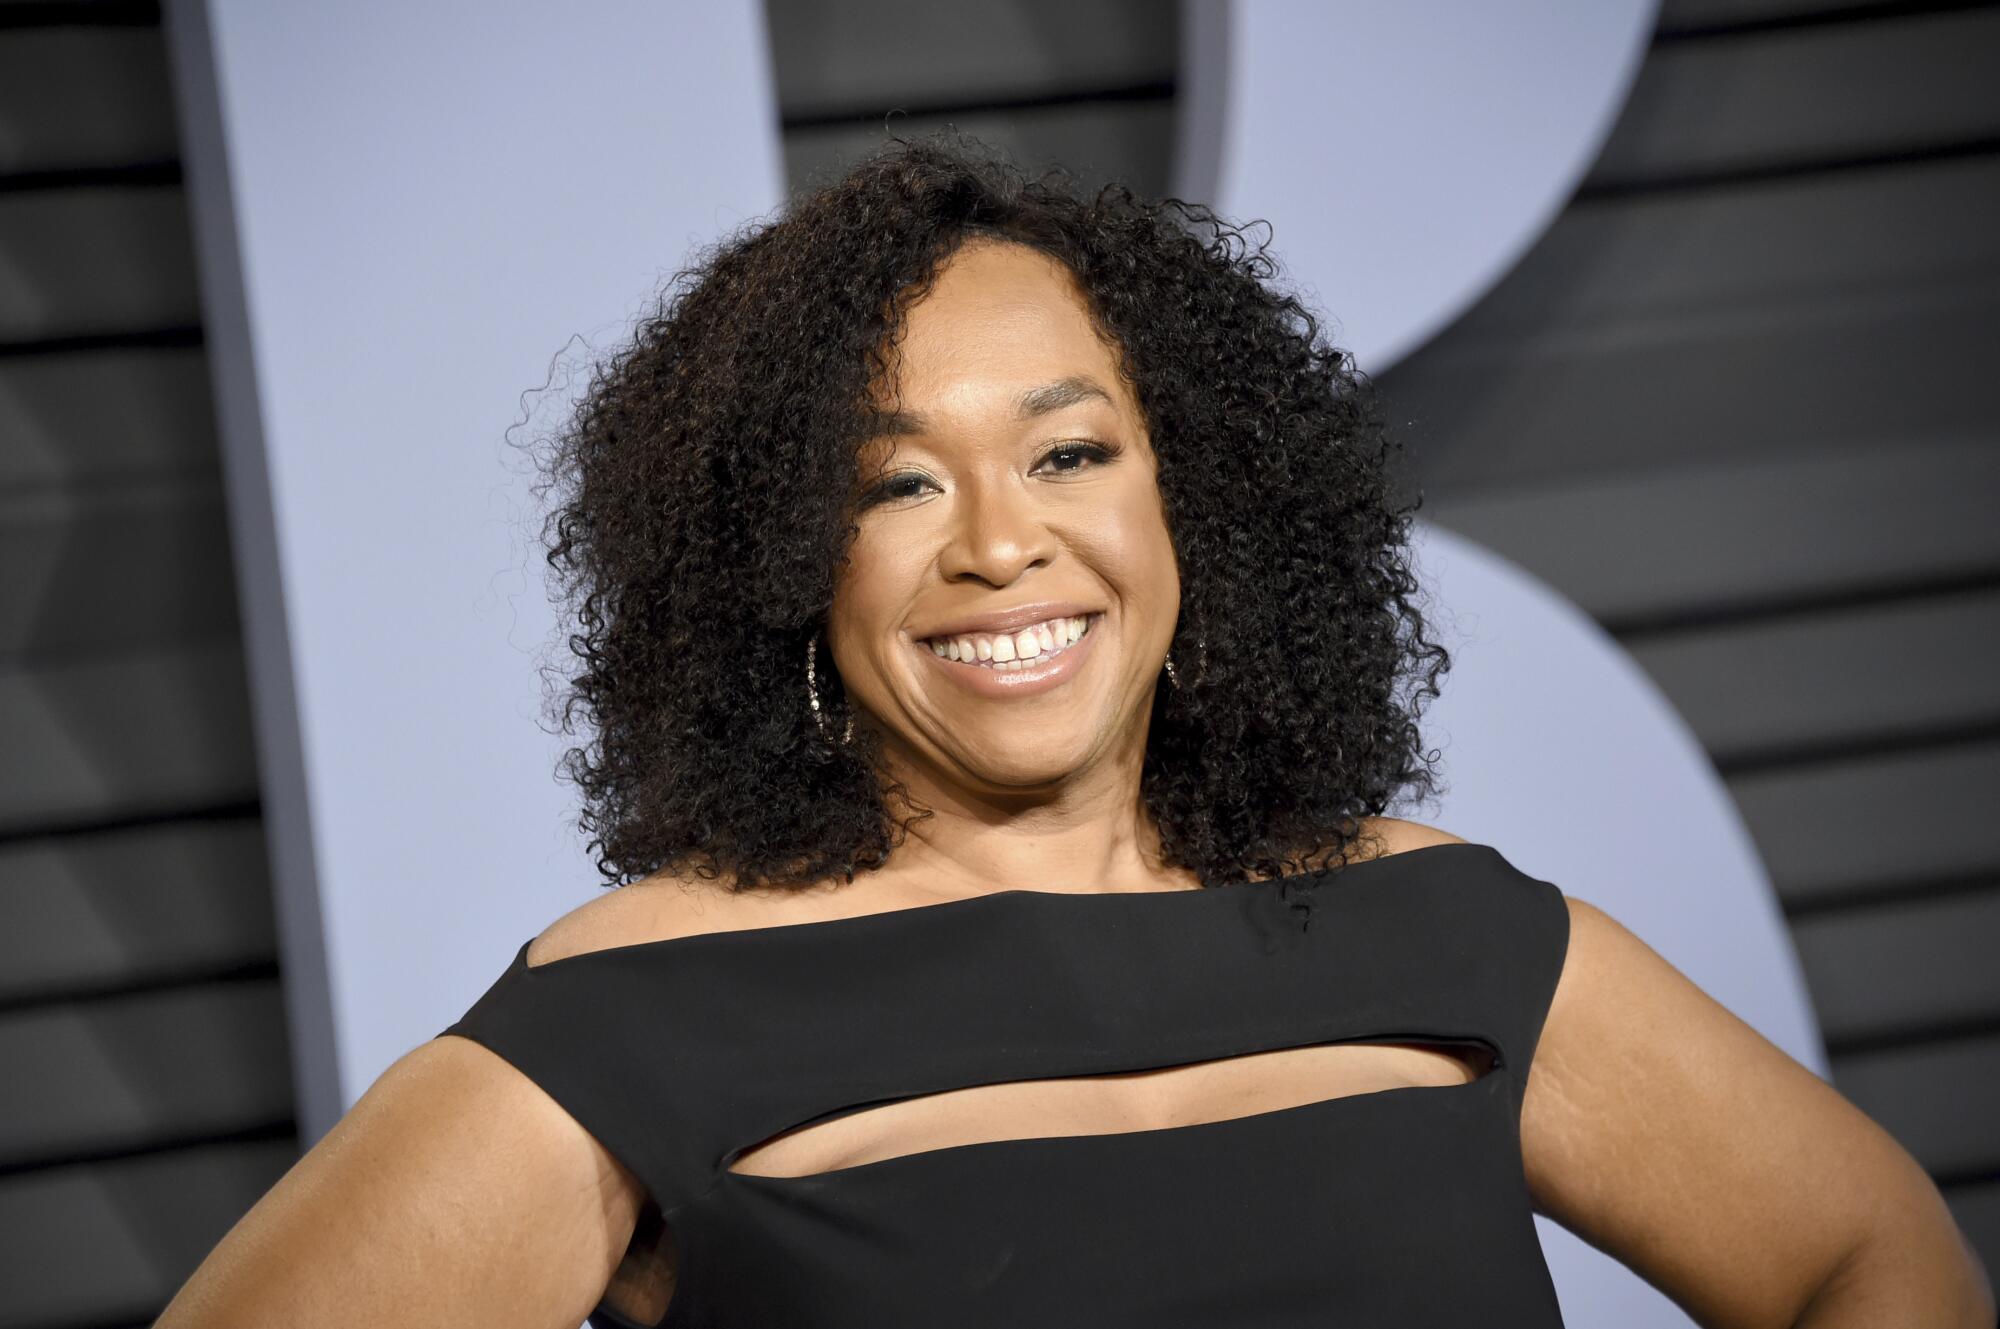 Shonda Rhimes wears a cut-out black dress and a big smile at the 2018 Vanity Fair Oscars party.